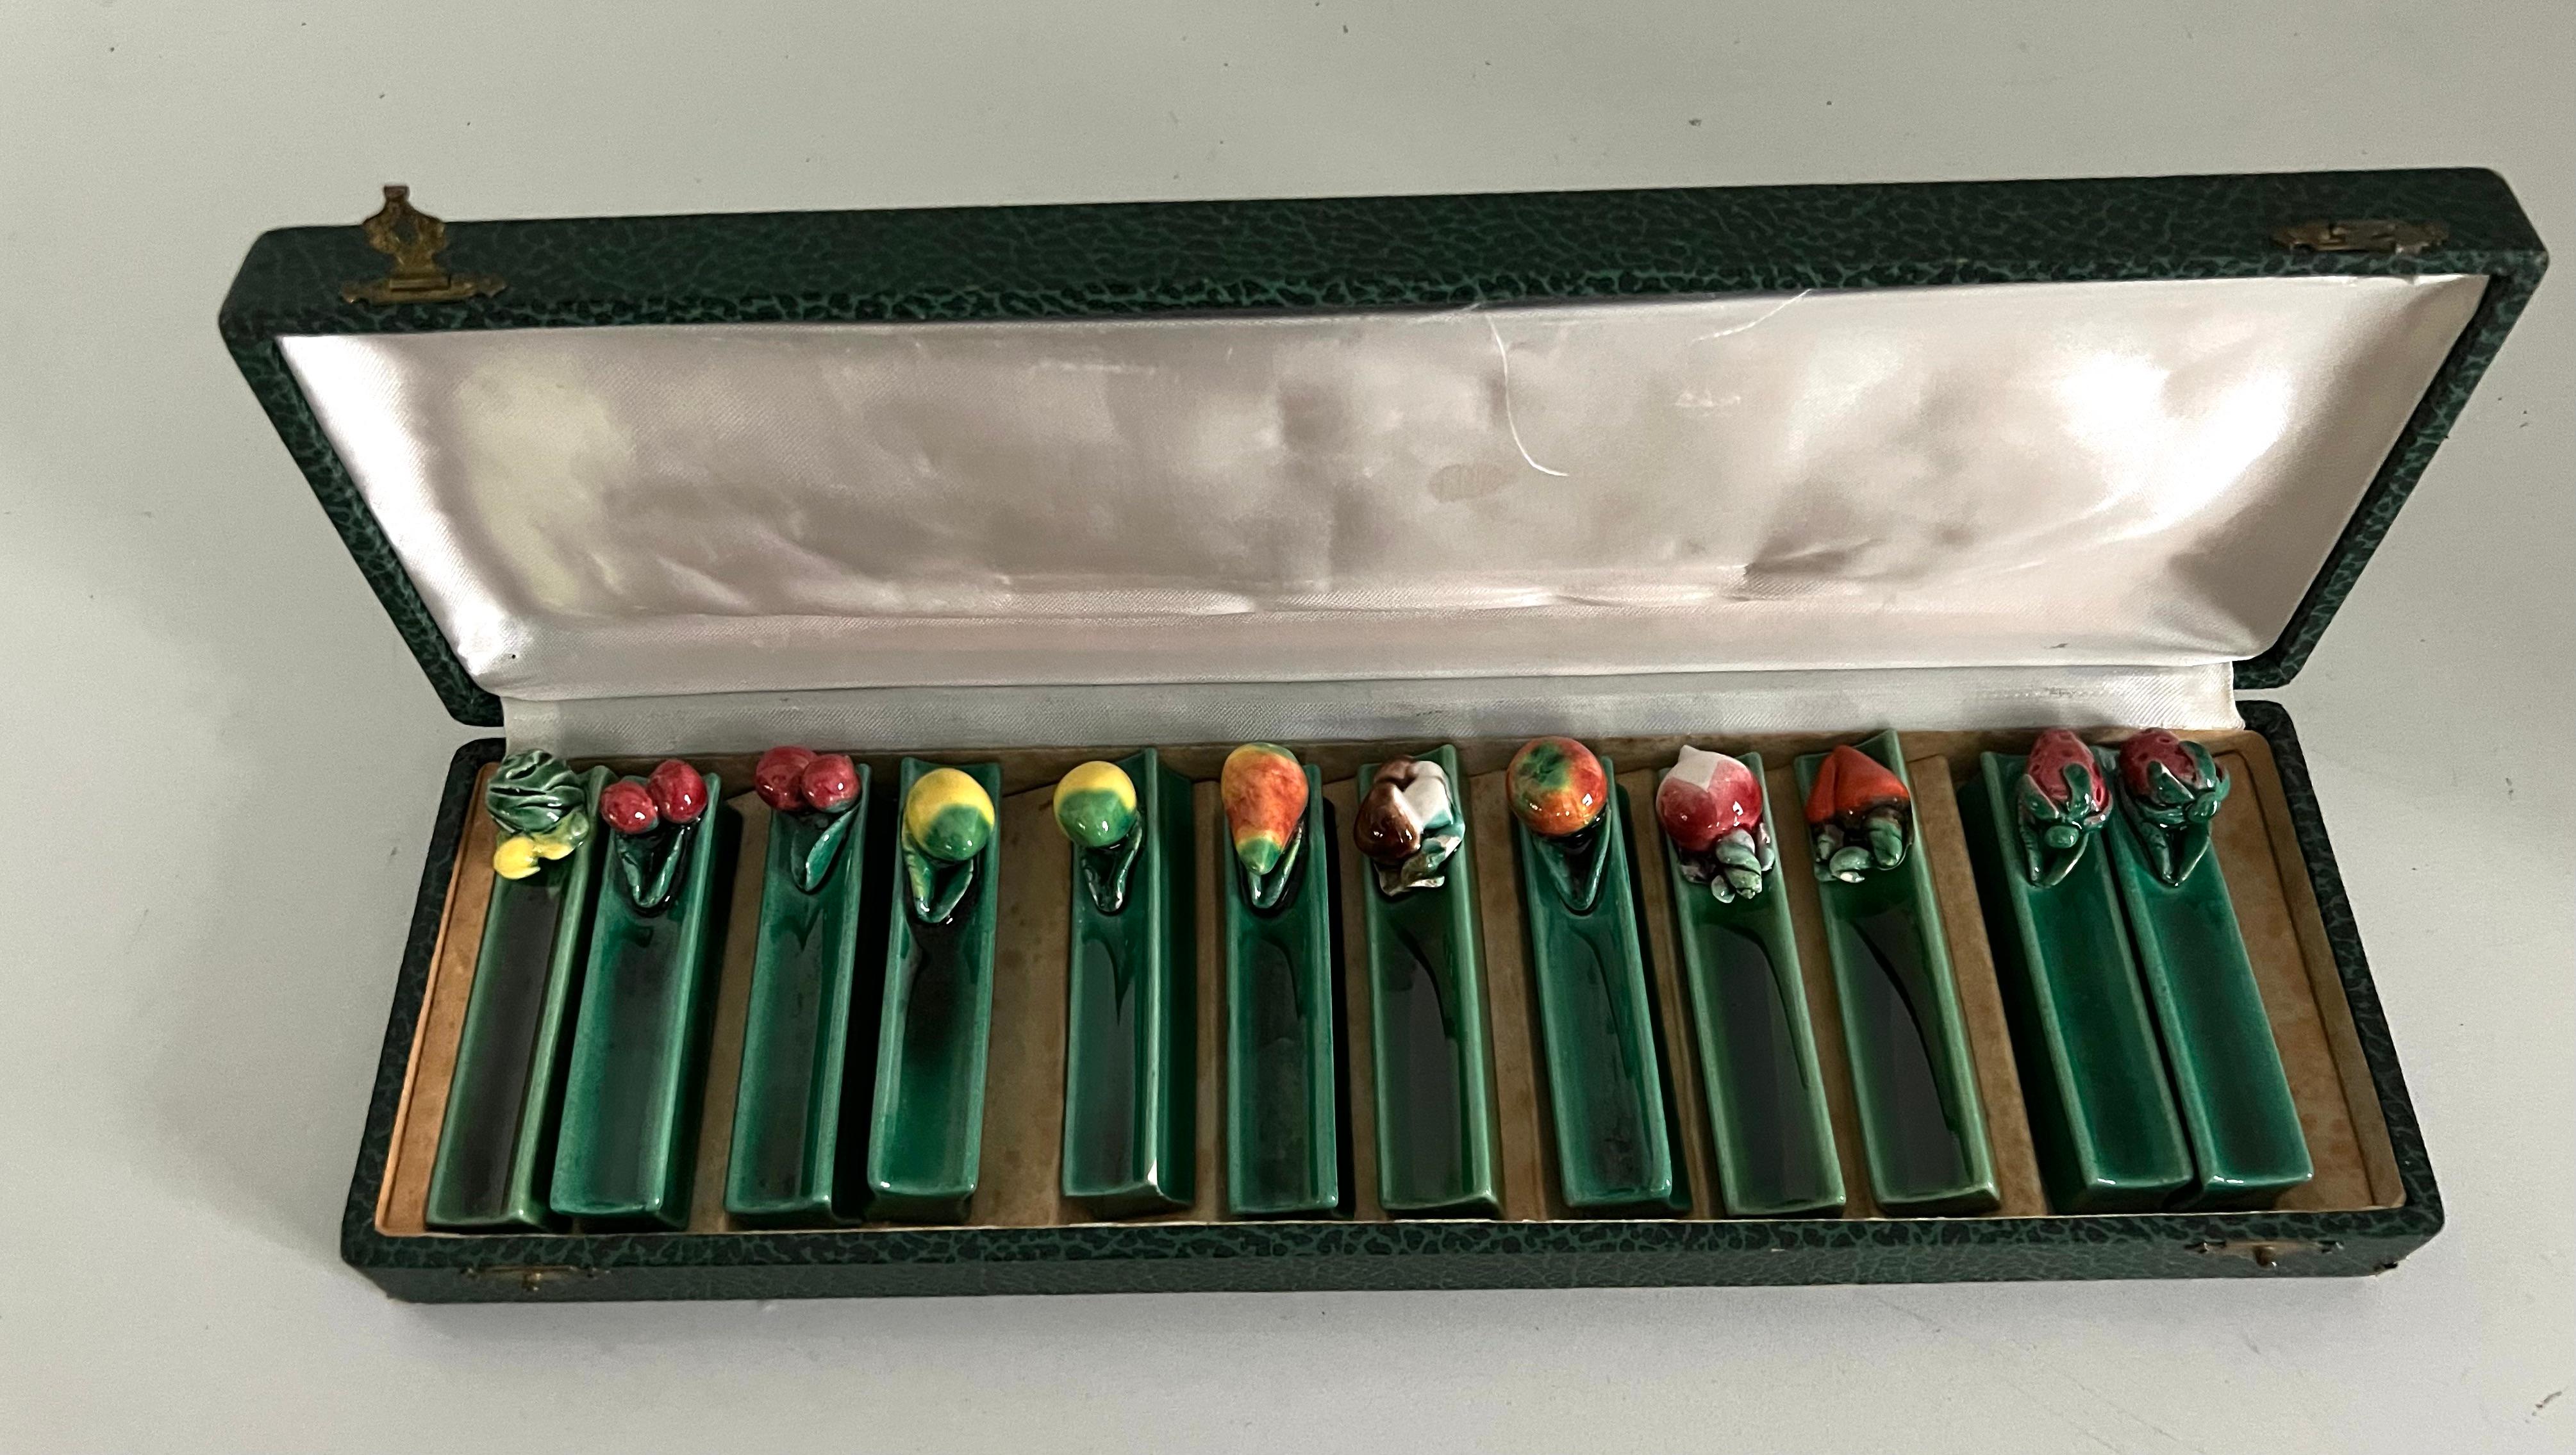 A wonderful set of Majolica knife rests acquired in Paris France. The set is in original box and contains lemons, cherries, mushrooms, turnips, strawberries, tomato, cabbage and pear. extremely nice and a very chic look for any setting especially